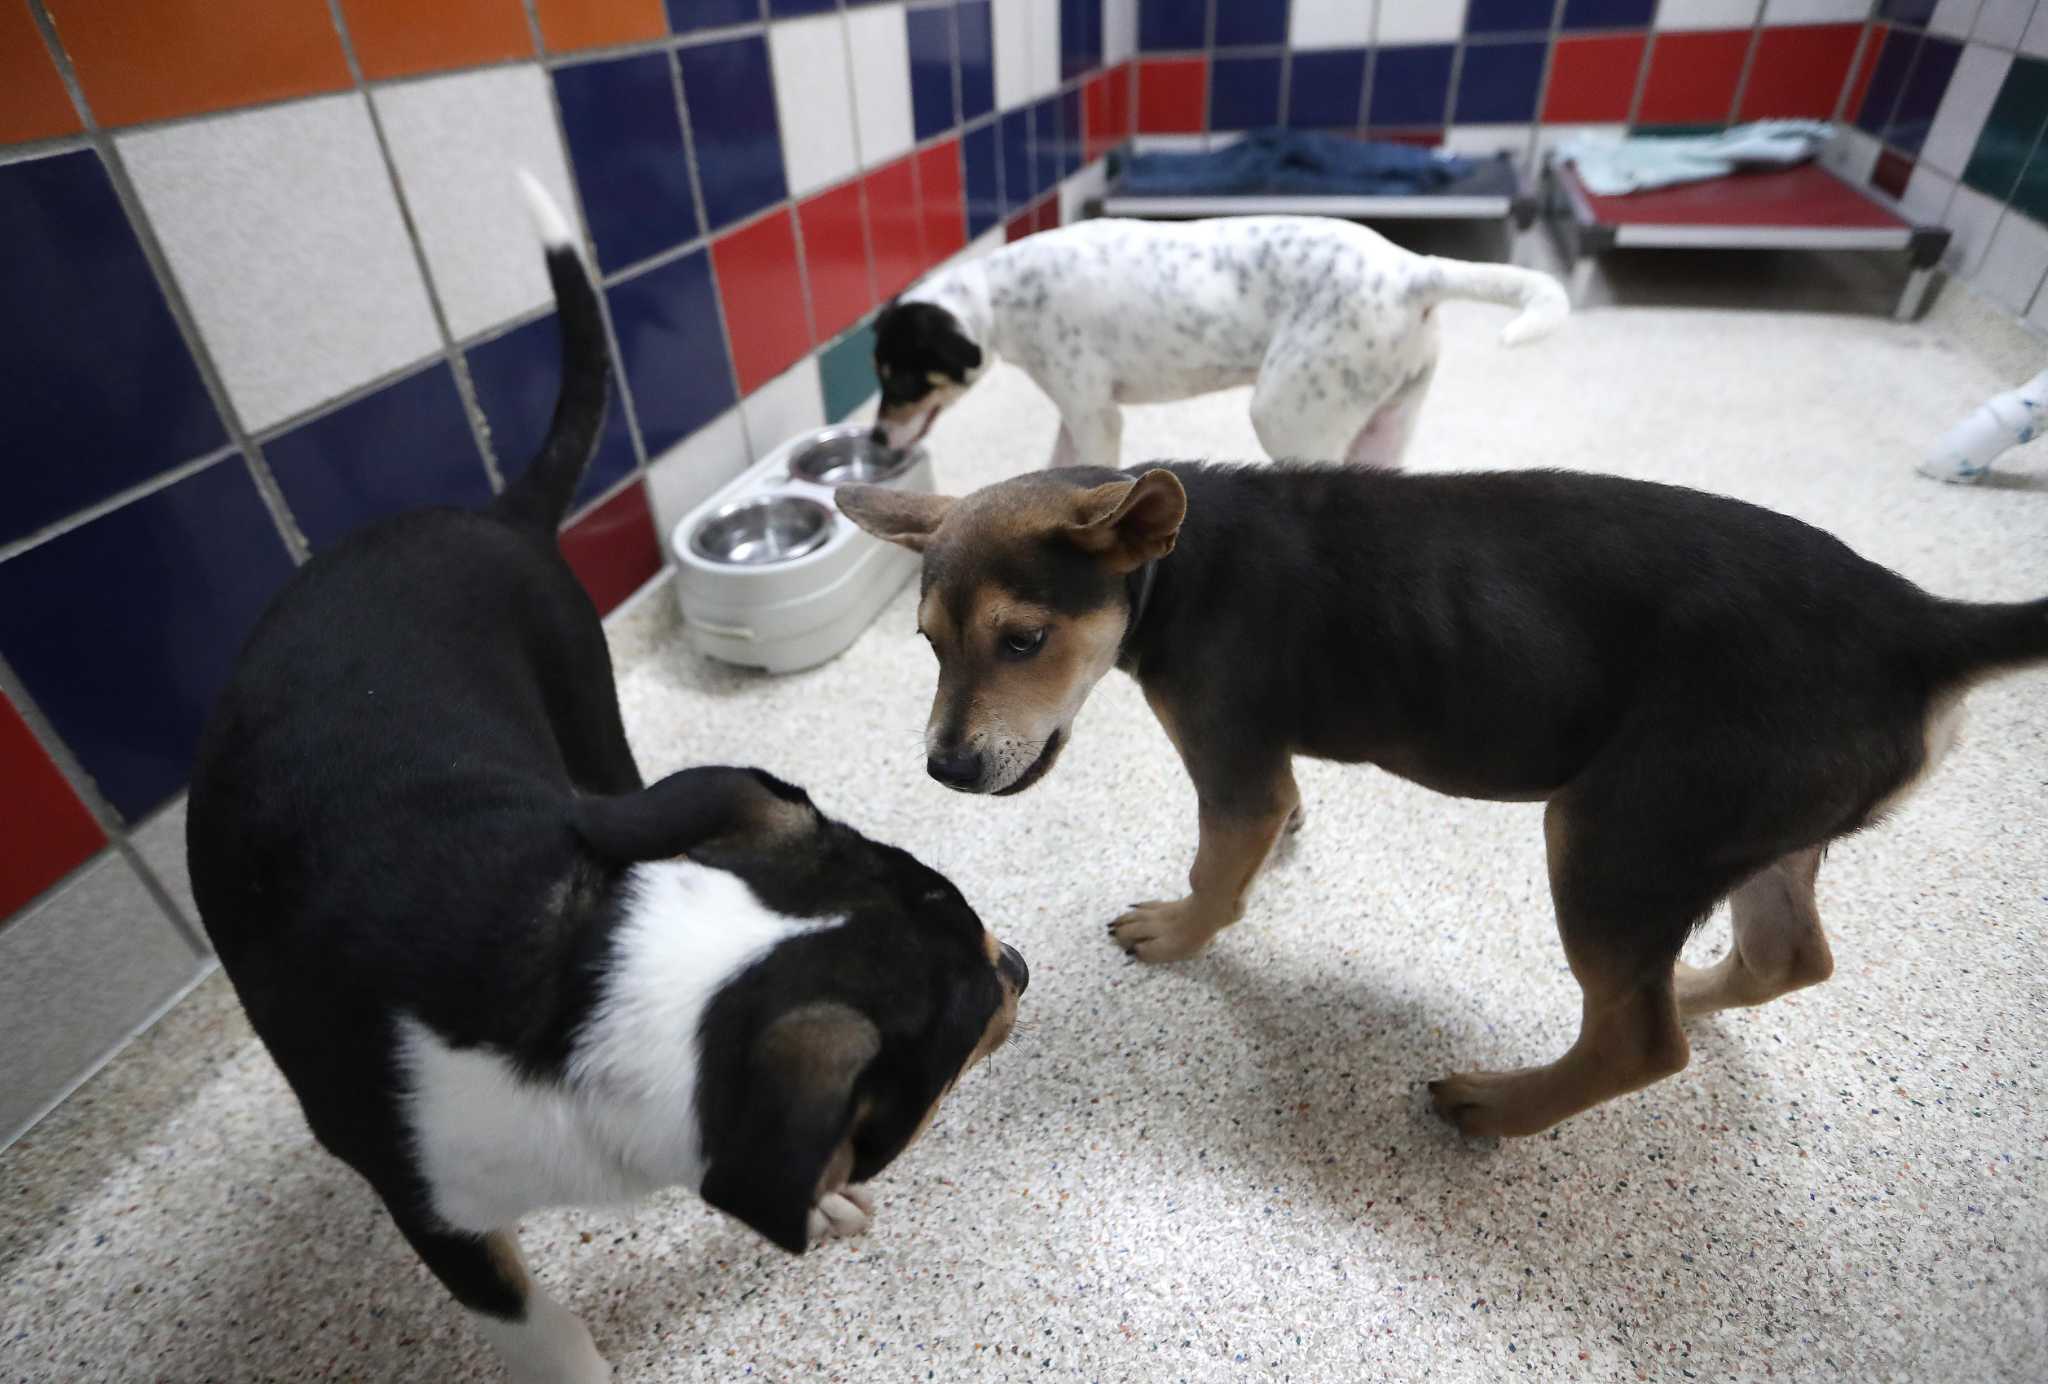 Houston animal shelters near critical capacity levels due to COVID surrenders, evictions